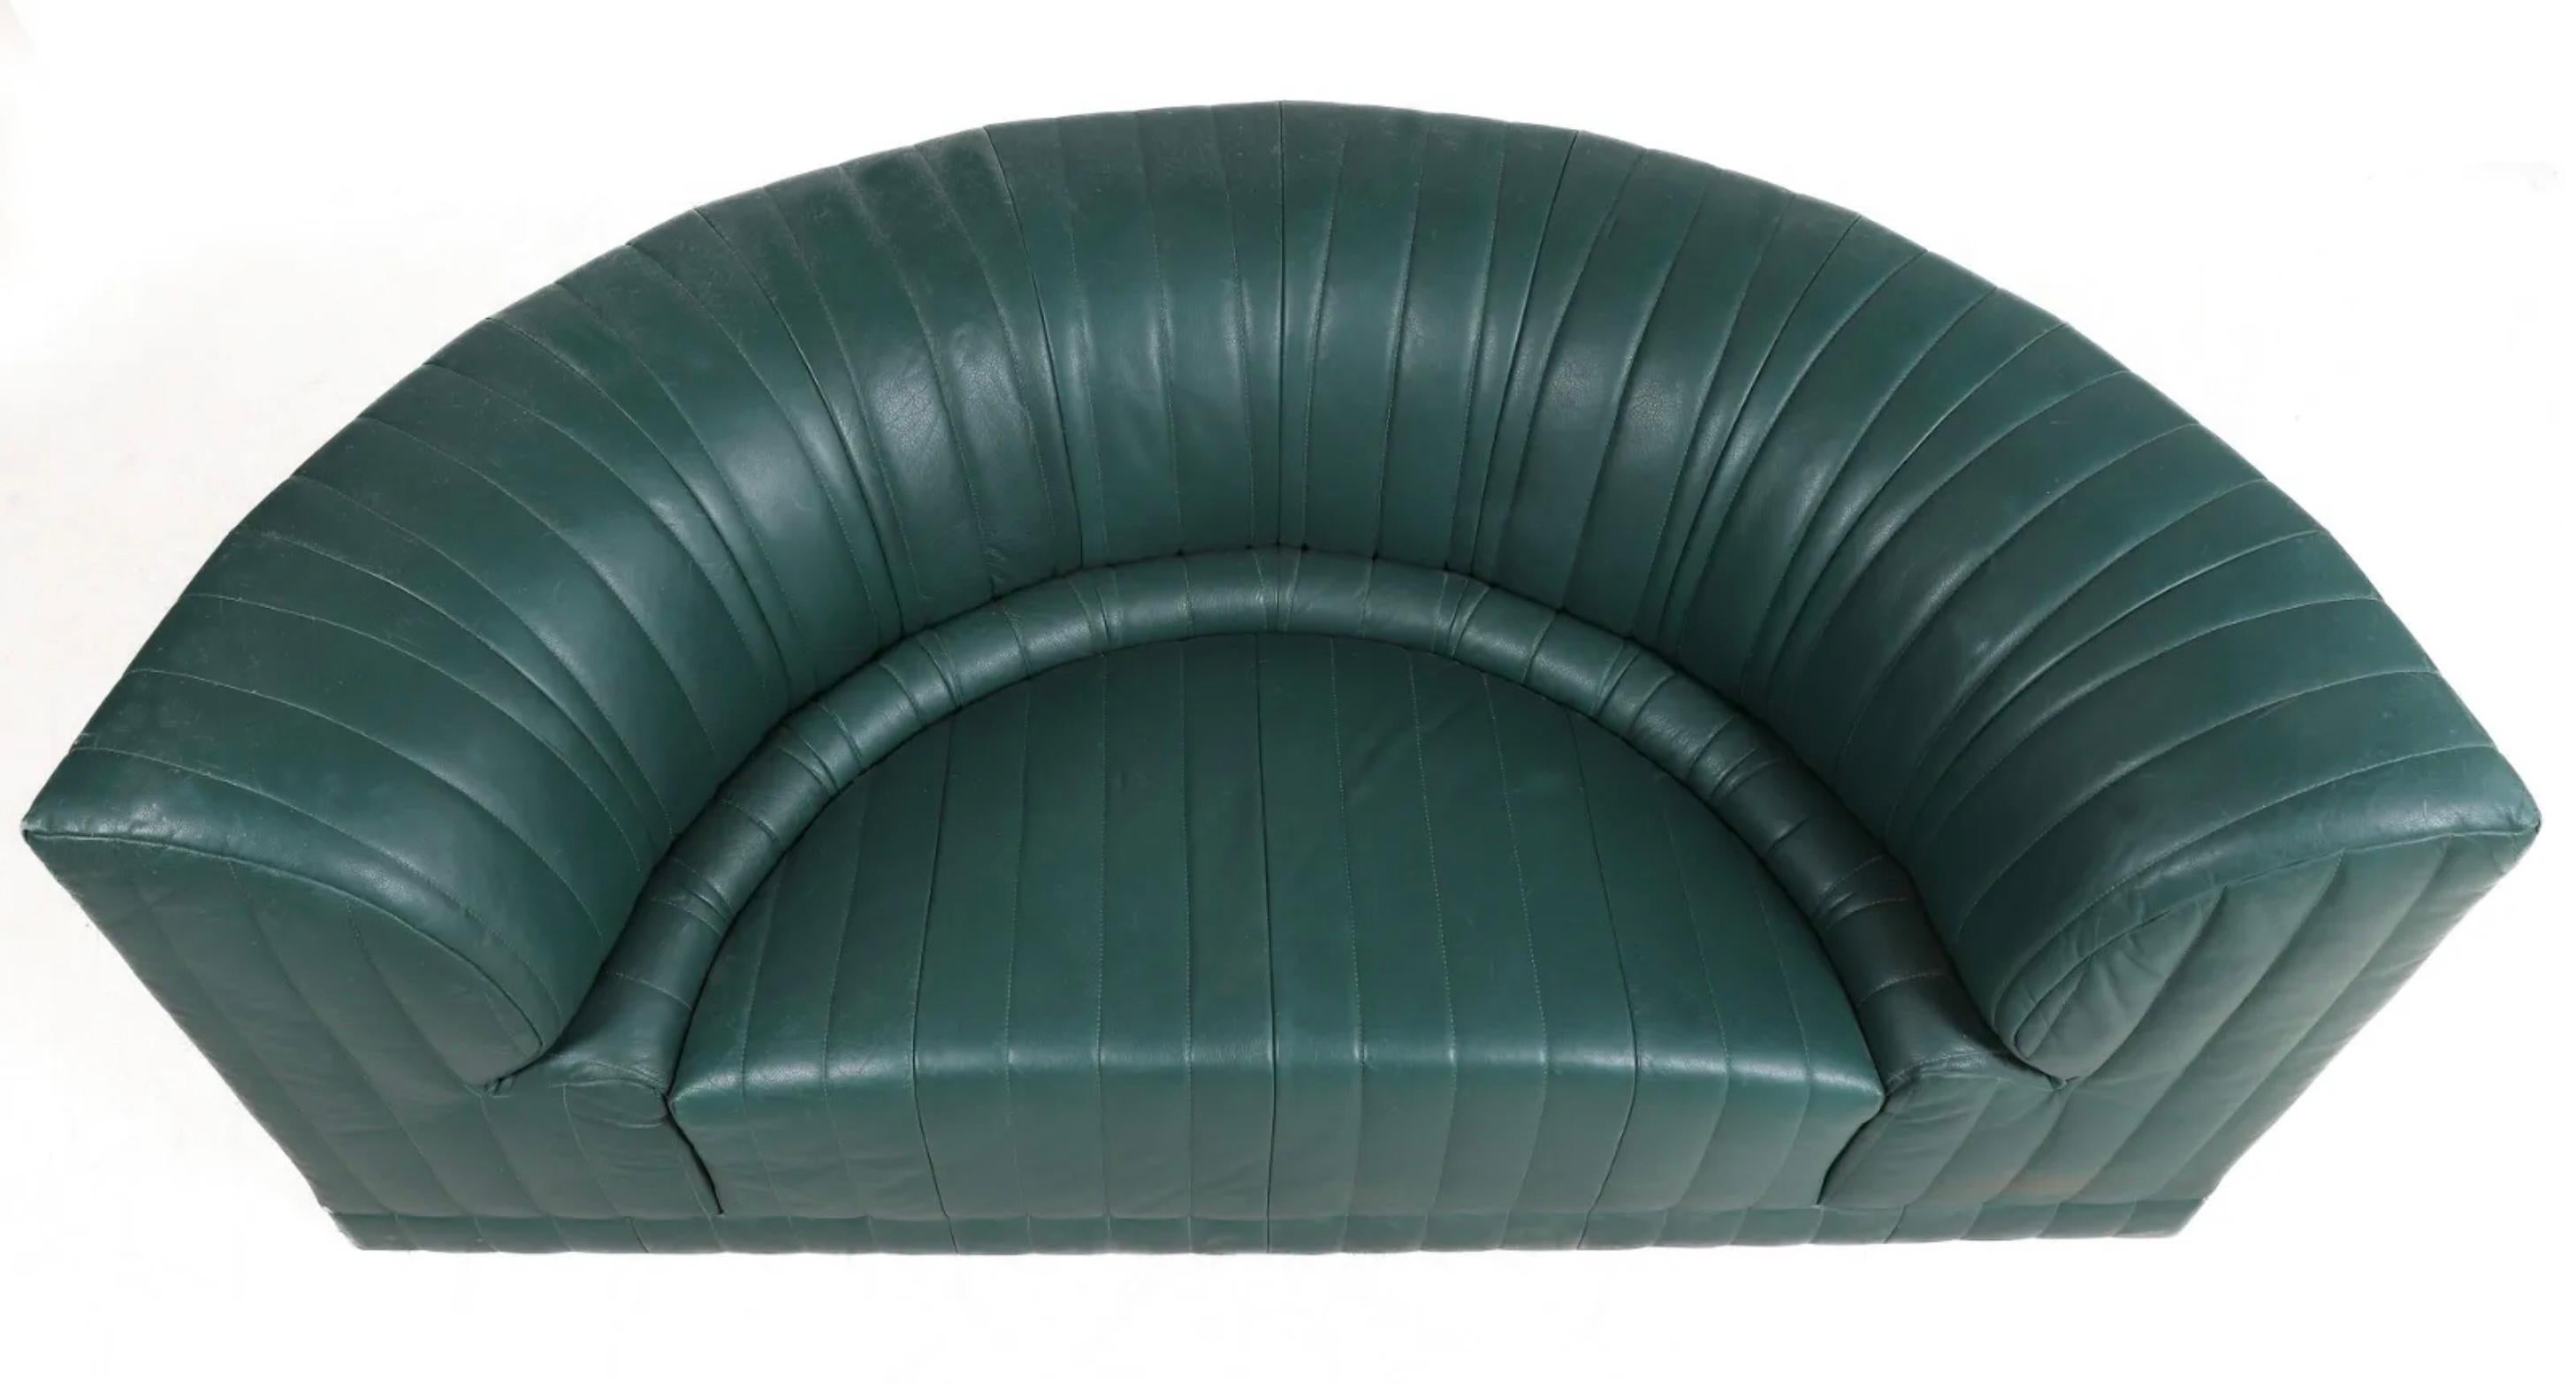 One Post Modern Half Round Section of Roche Bobois Green Leather Sectional Sofa 1983. Soft Green leather Can be used as a sofa or side chair. Great Post Modern design. Only (1) Section Available. Located in Brooklyn NYC. Labeled.

Great for Photo